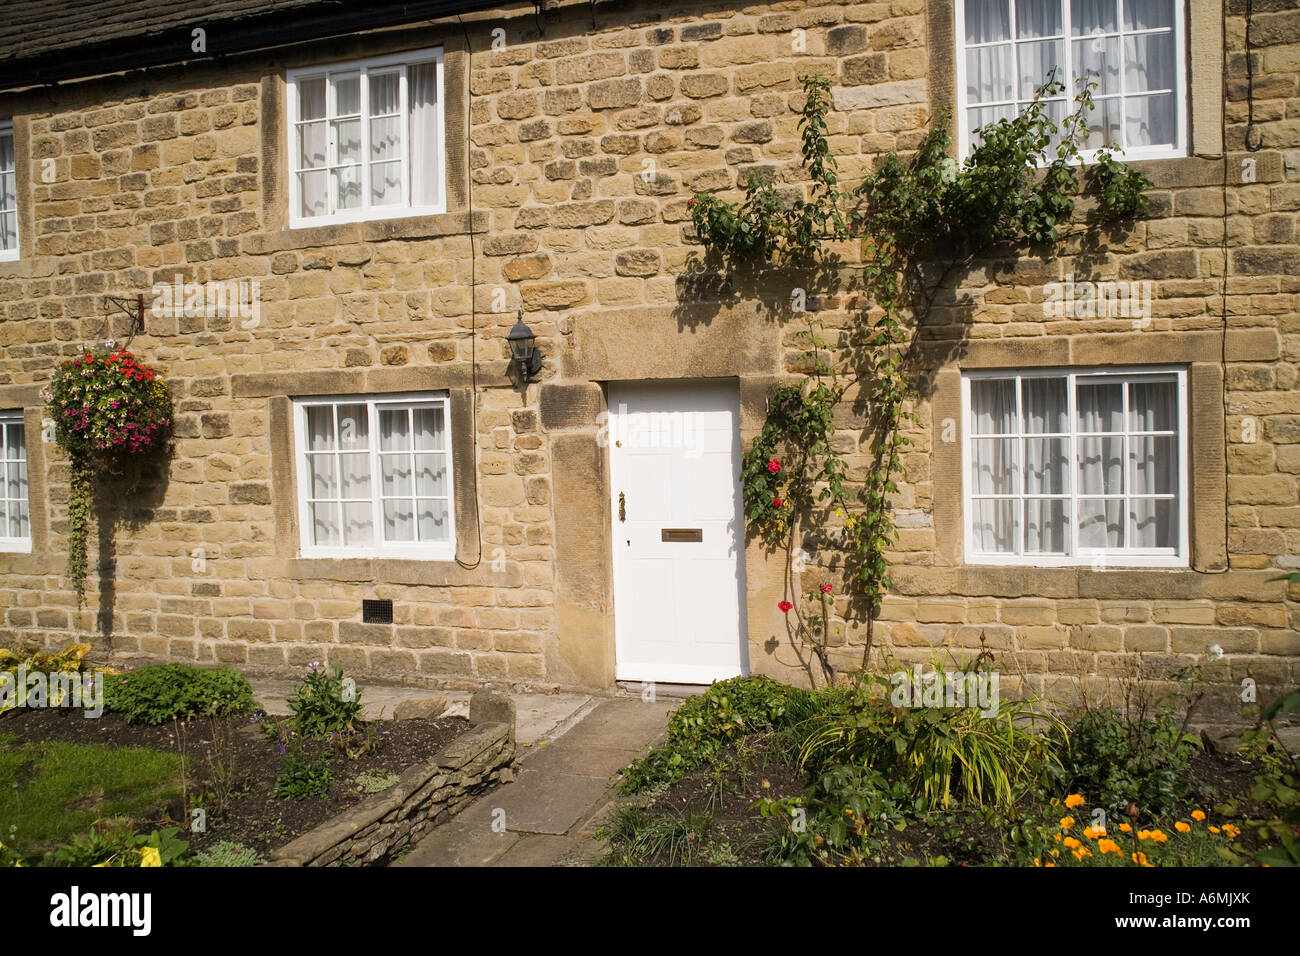 The Plague cottages in Eyam, Derbyshire, England Stock Photo